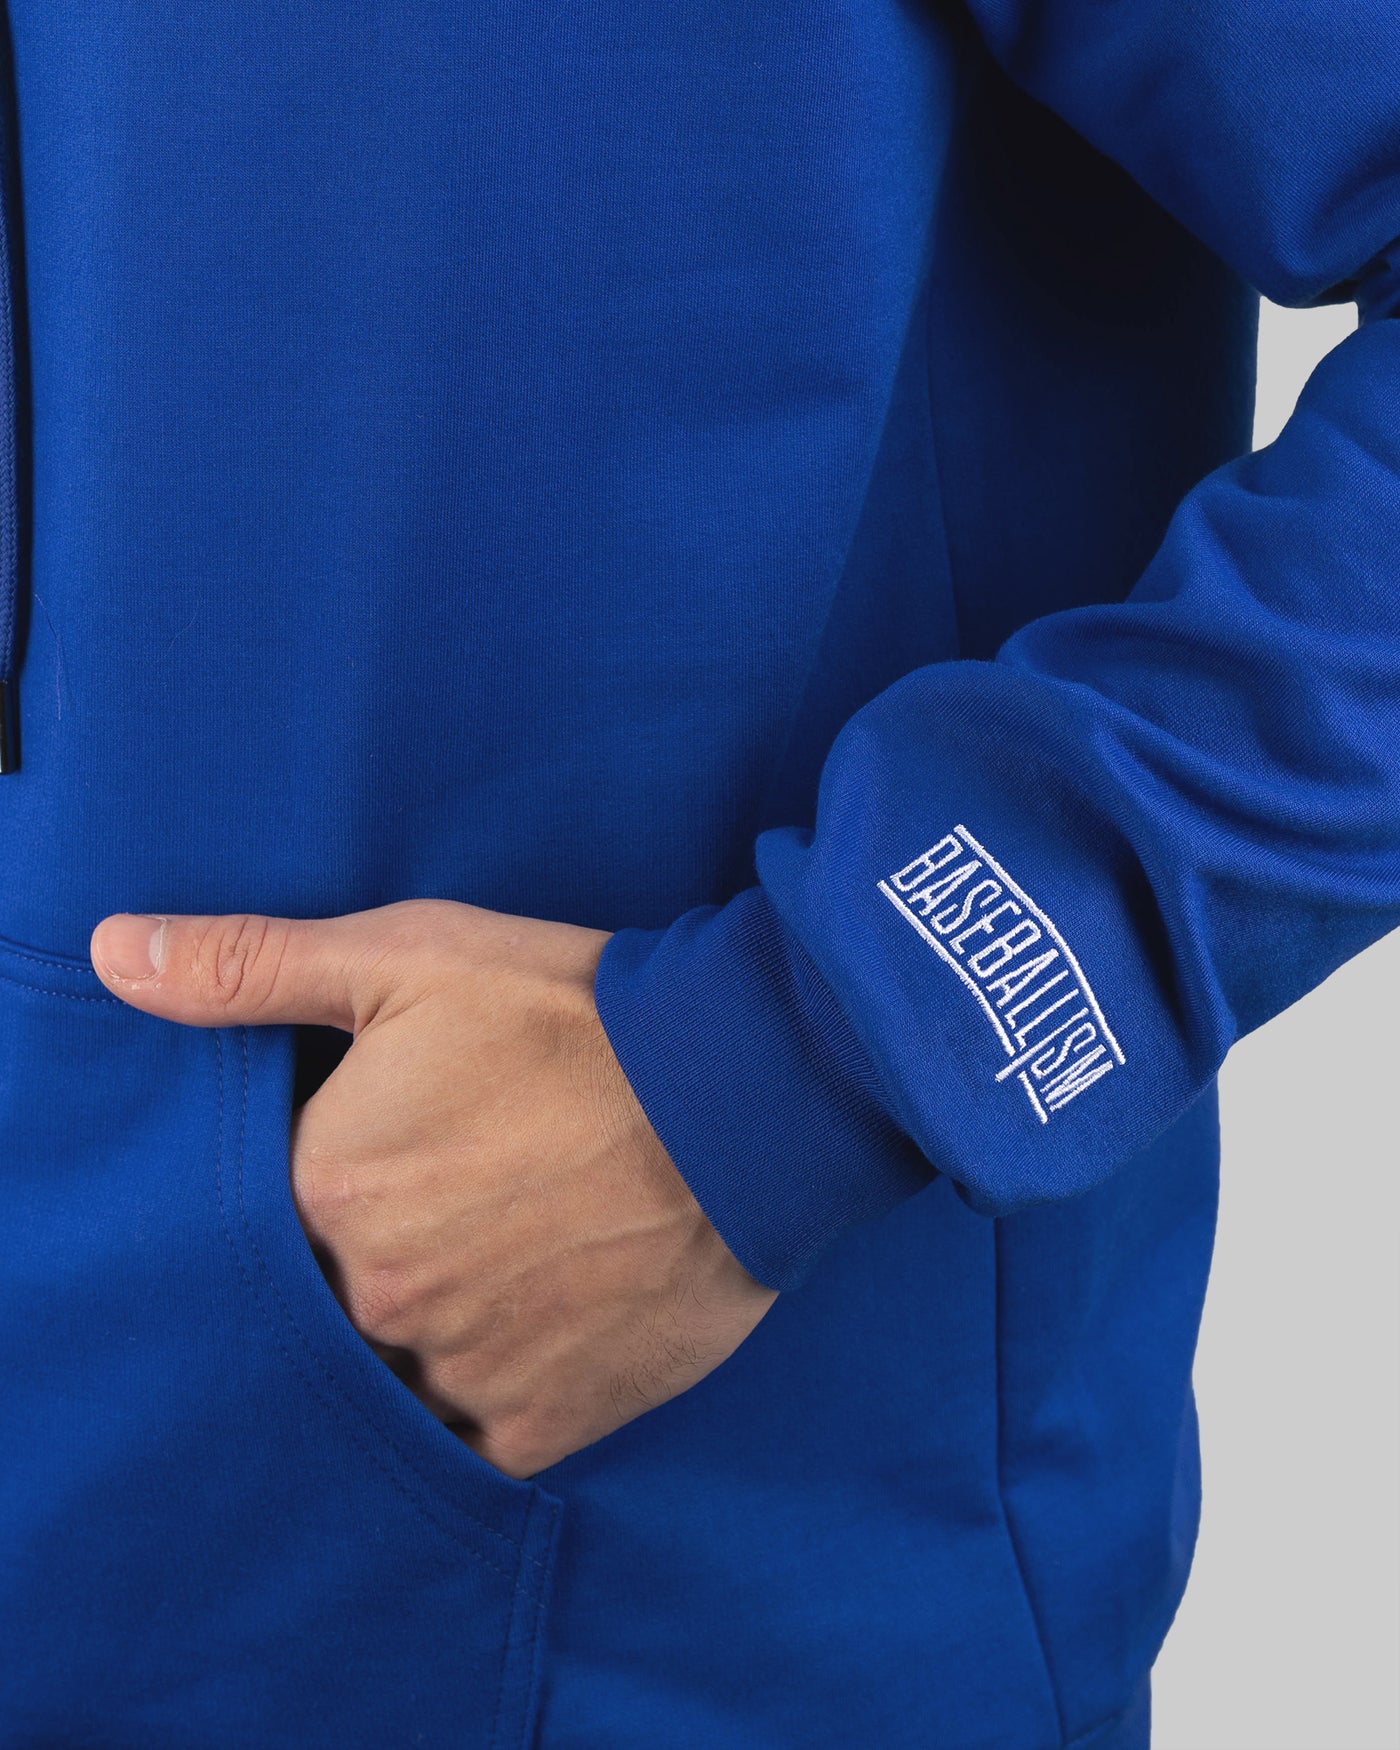 Sudadera con capucha Outfield Fence - Los Angeles Dodgers